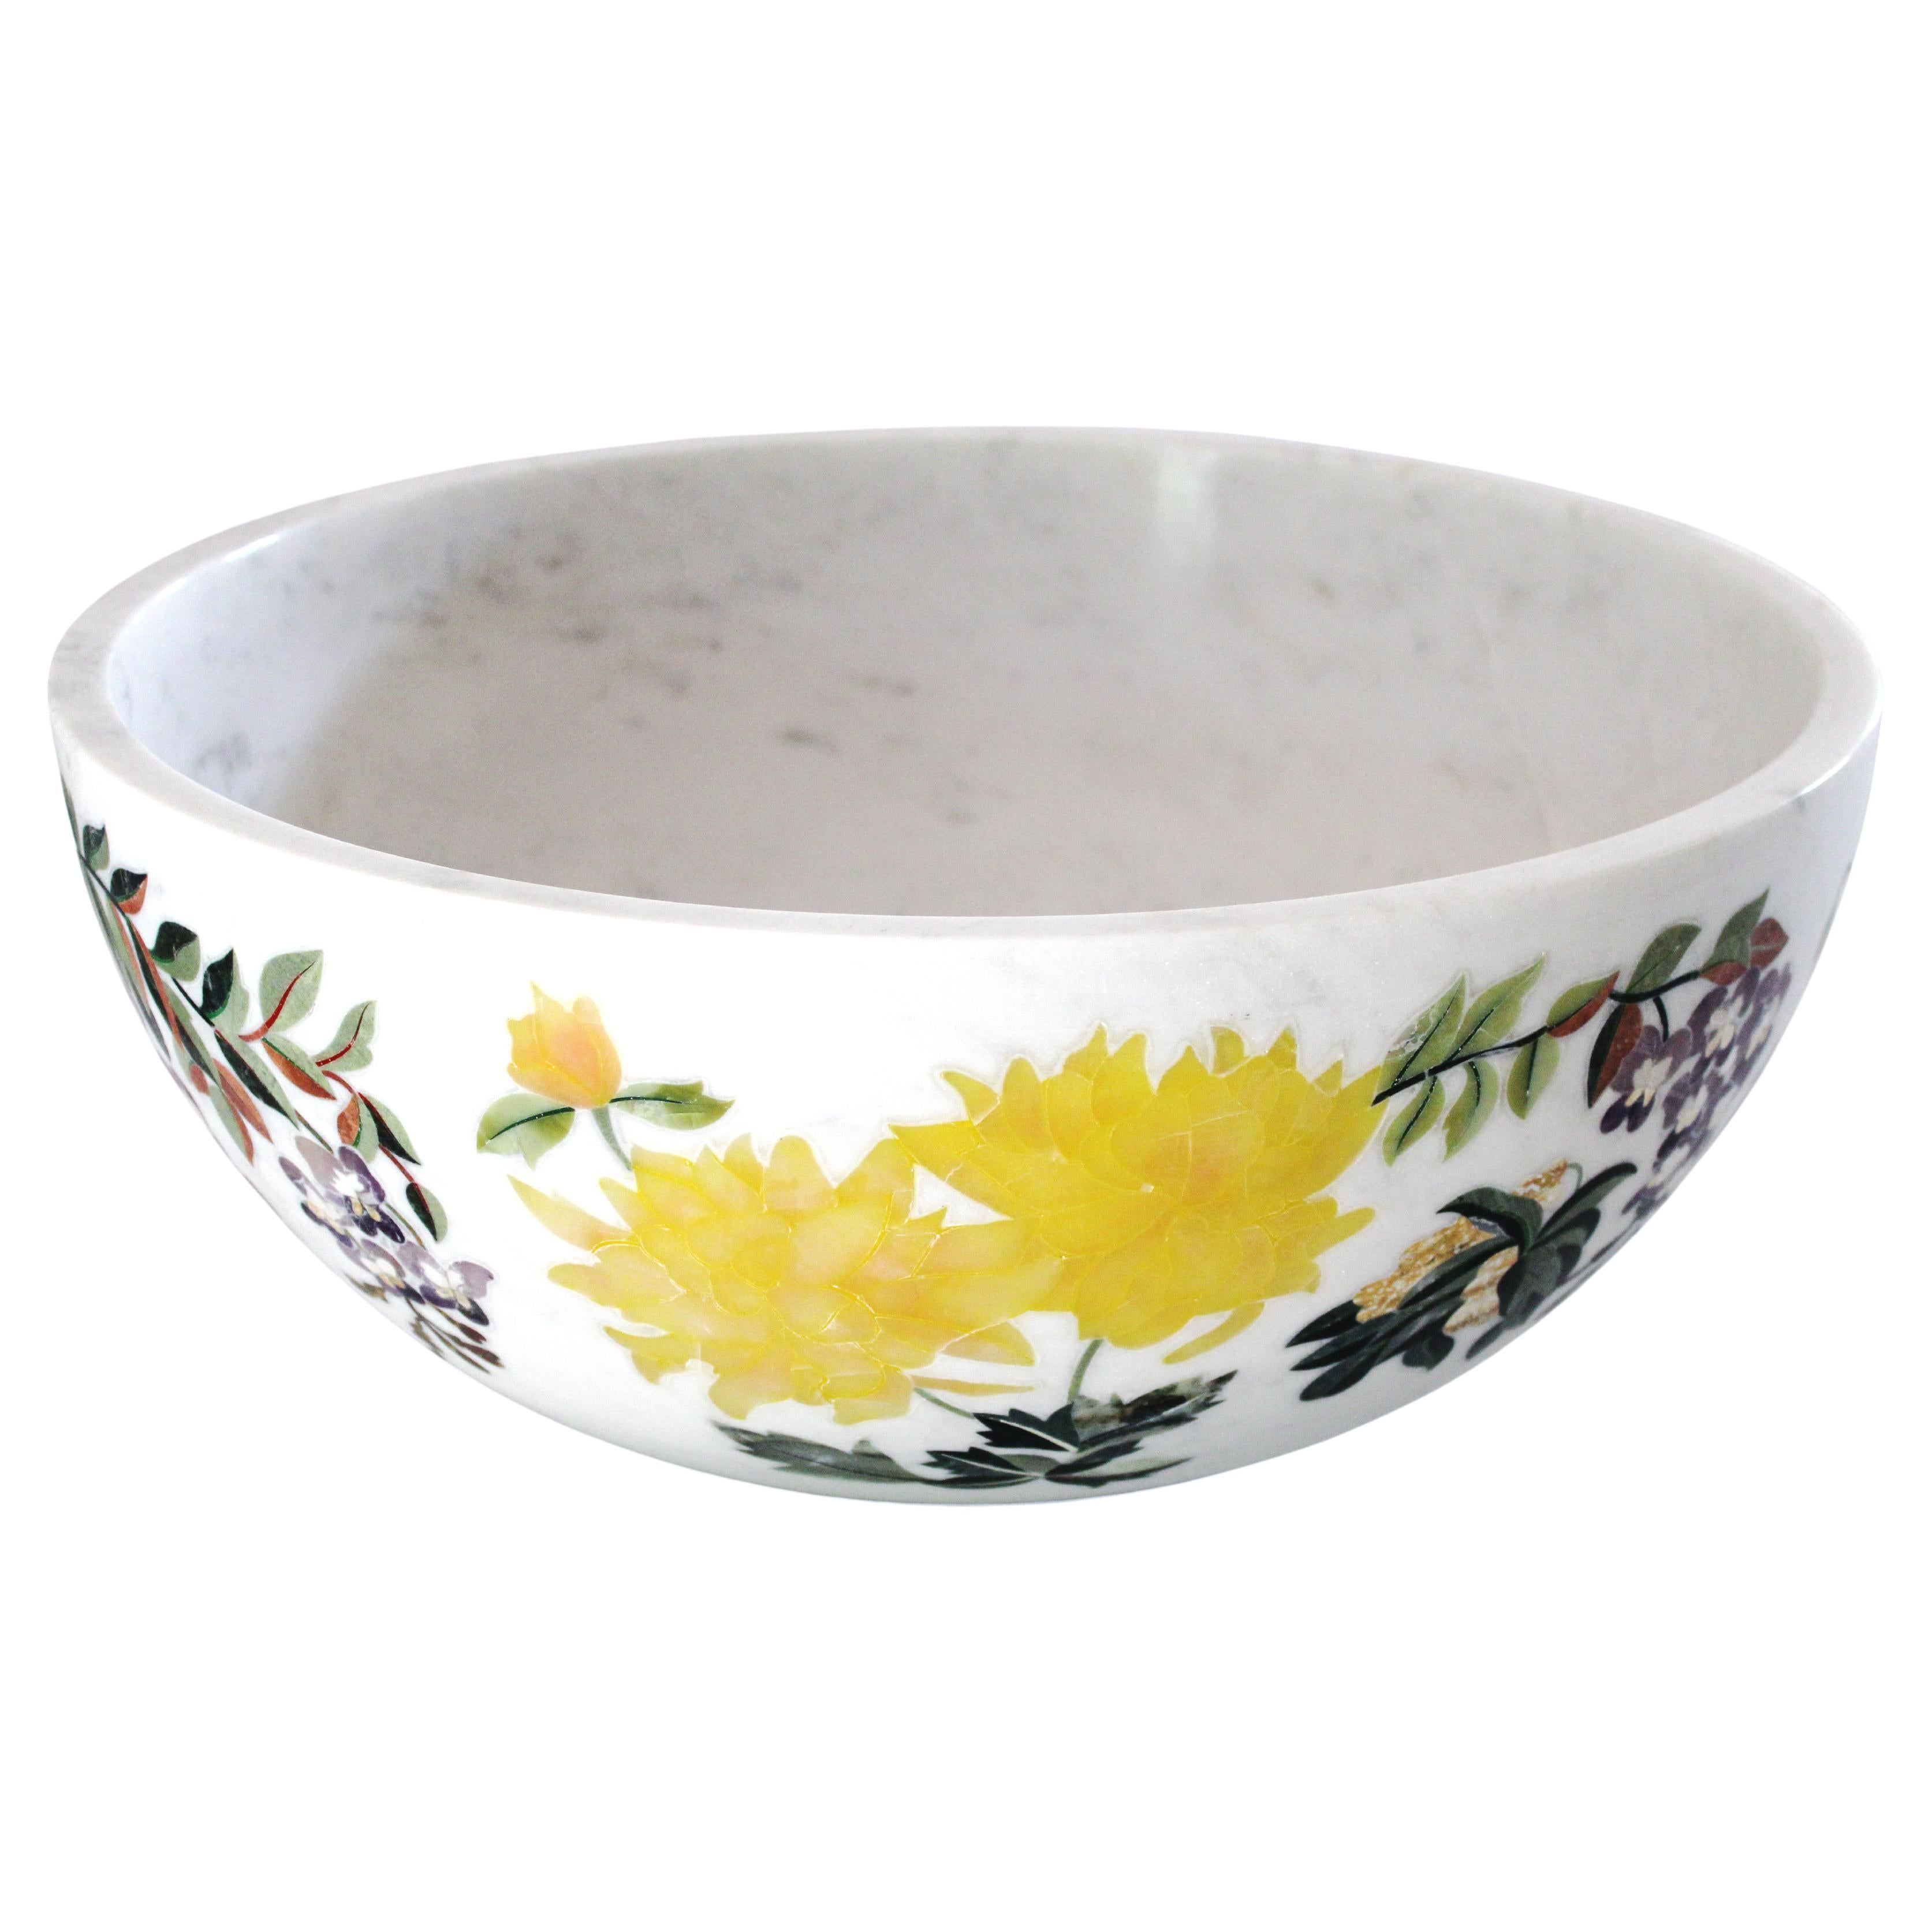 Handmade Ornamenti Bowl Inlay in White Marble by Stephanie Odegard For Sale